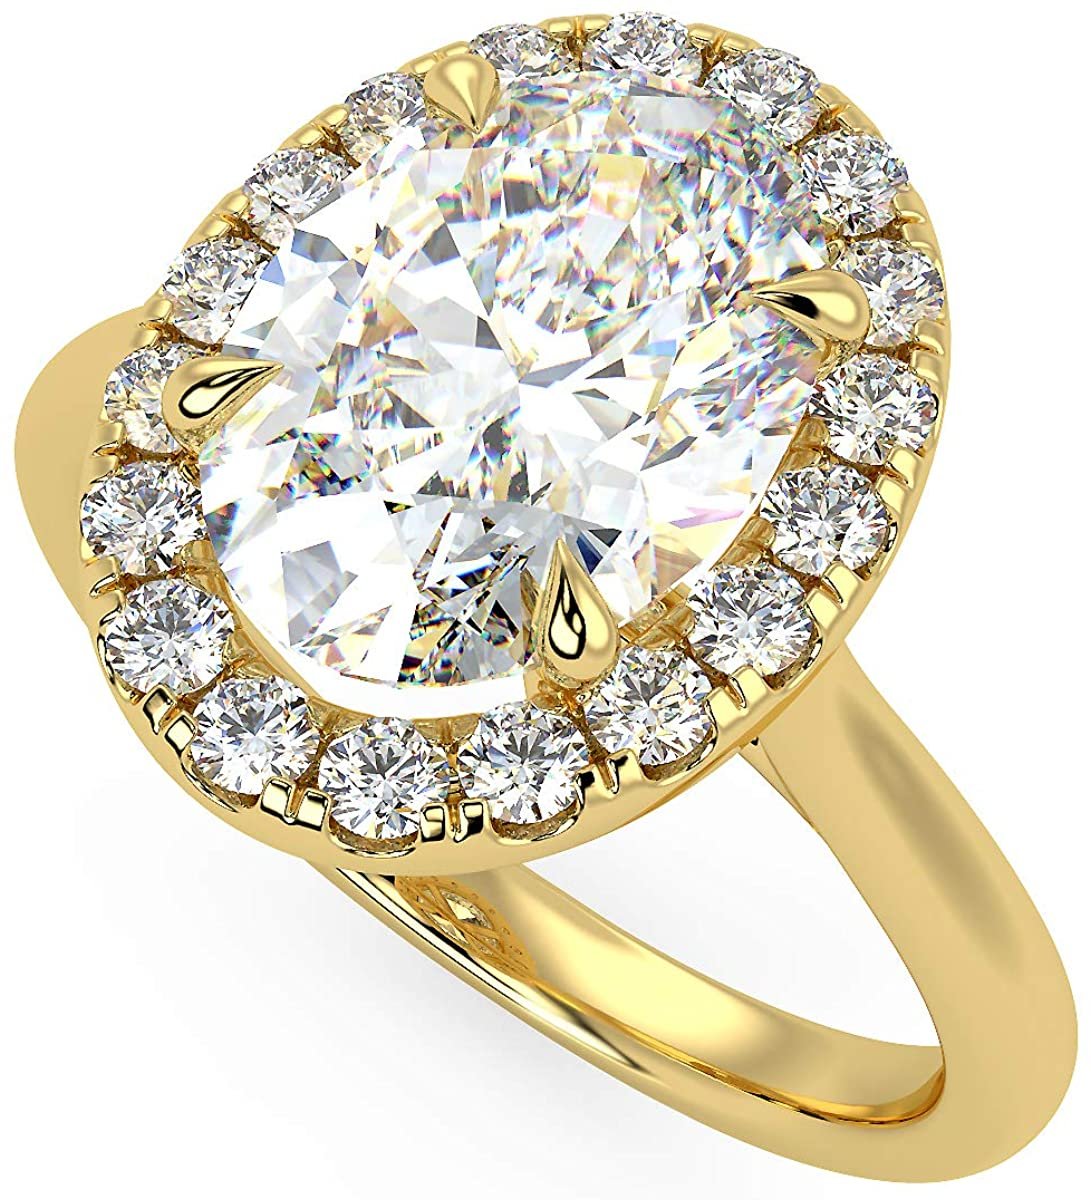 IGI Certified 14K Yellow Gold 1-3/4 Carat Oval Lab Created Diamond Vintage-Inspired Halo Engagement Ring (G-H Color, VS1-VS2 Clarity, 1.5 Carat Center Stone) - Size 8